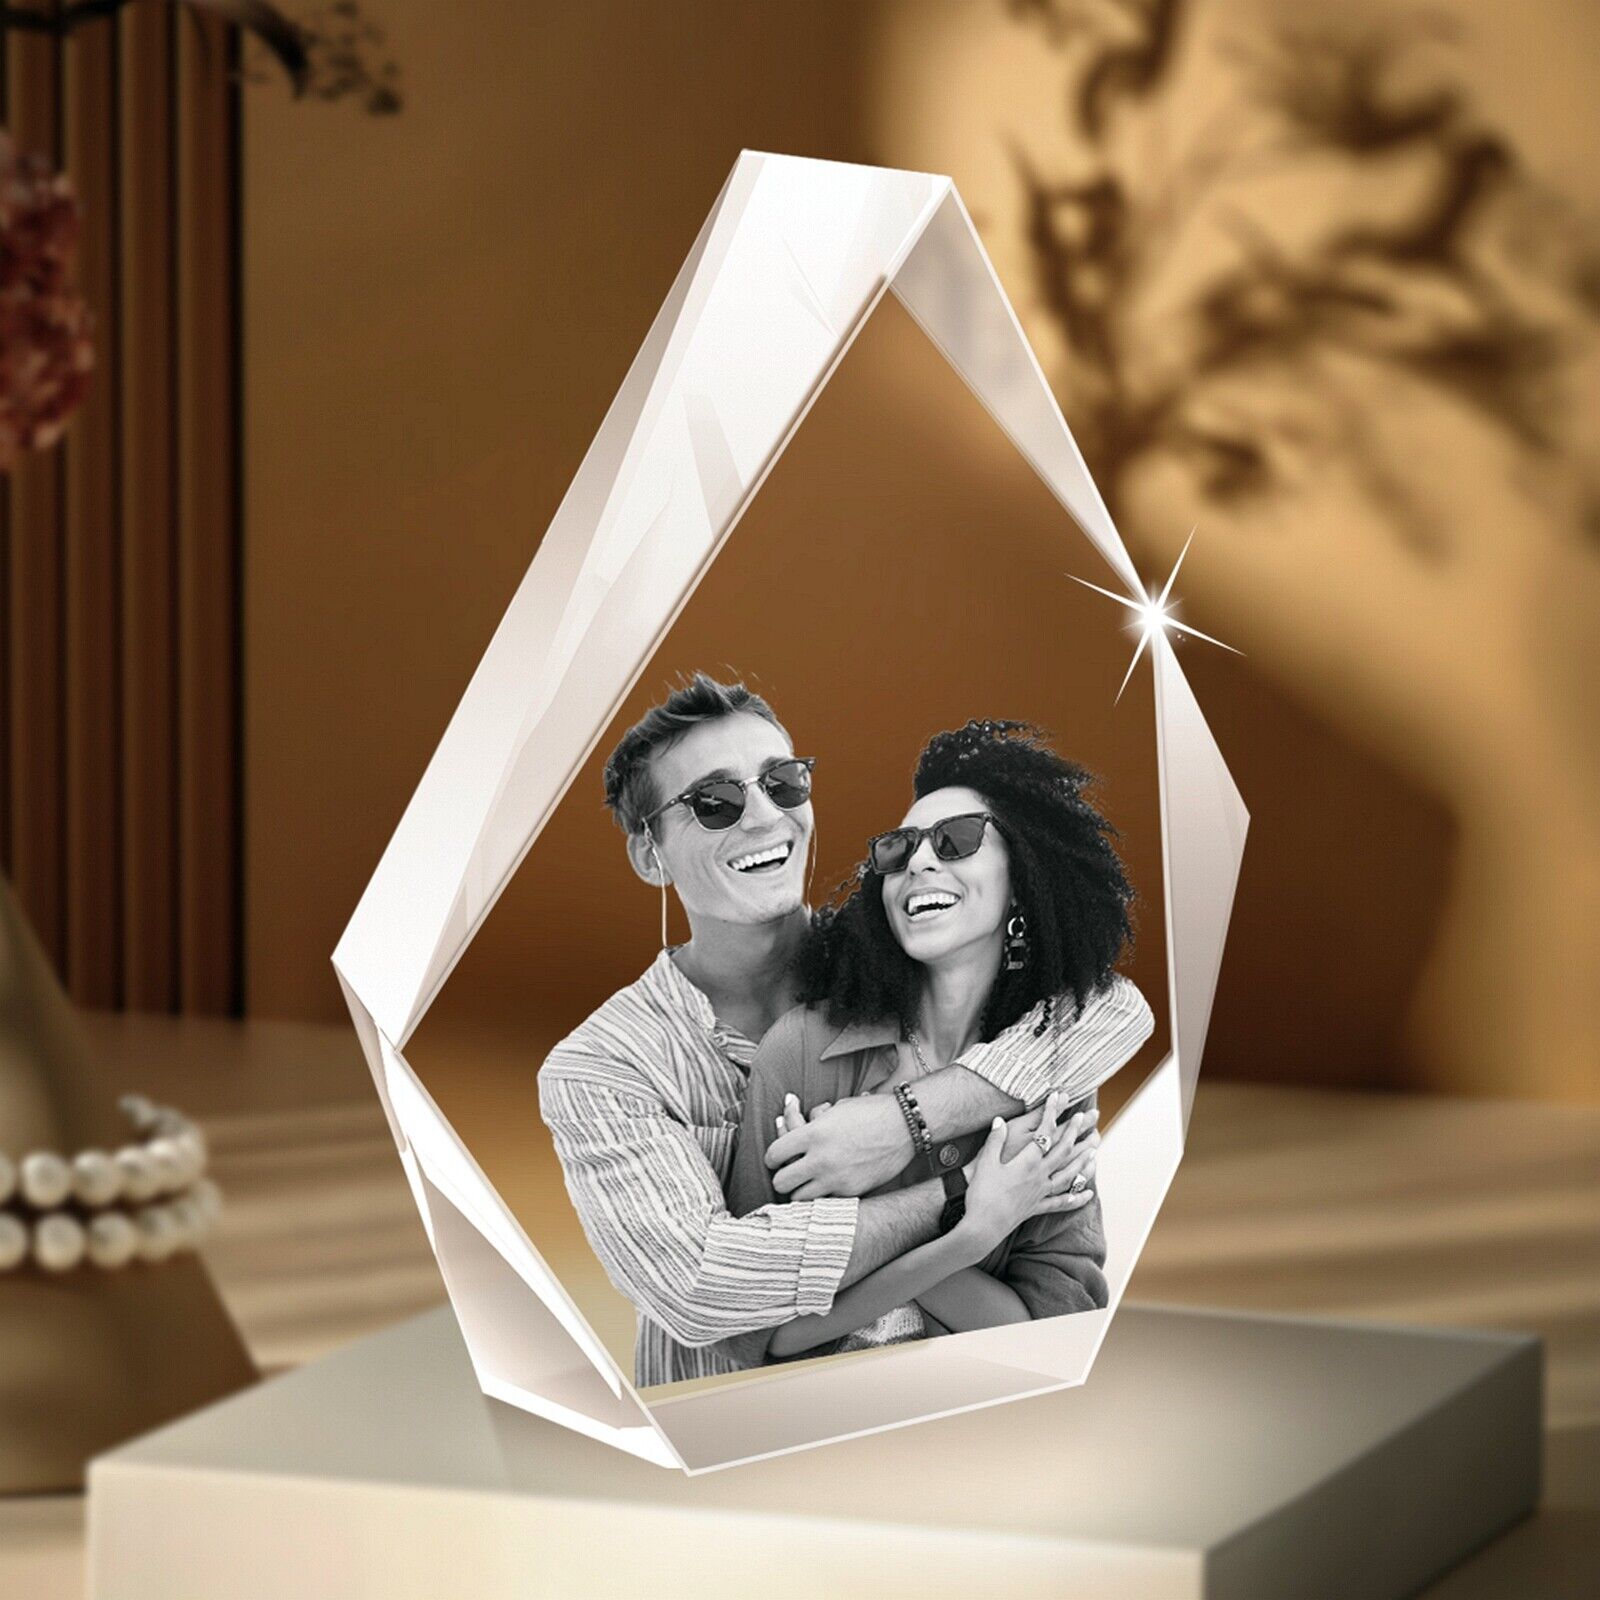 Personalised 3D Crystal Iceberg Gift Ideas, Unique Gift For Birthday Anniversary